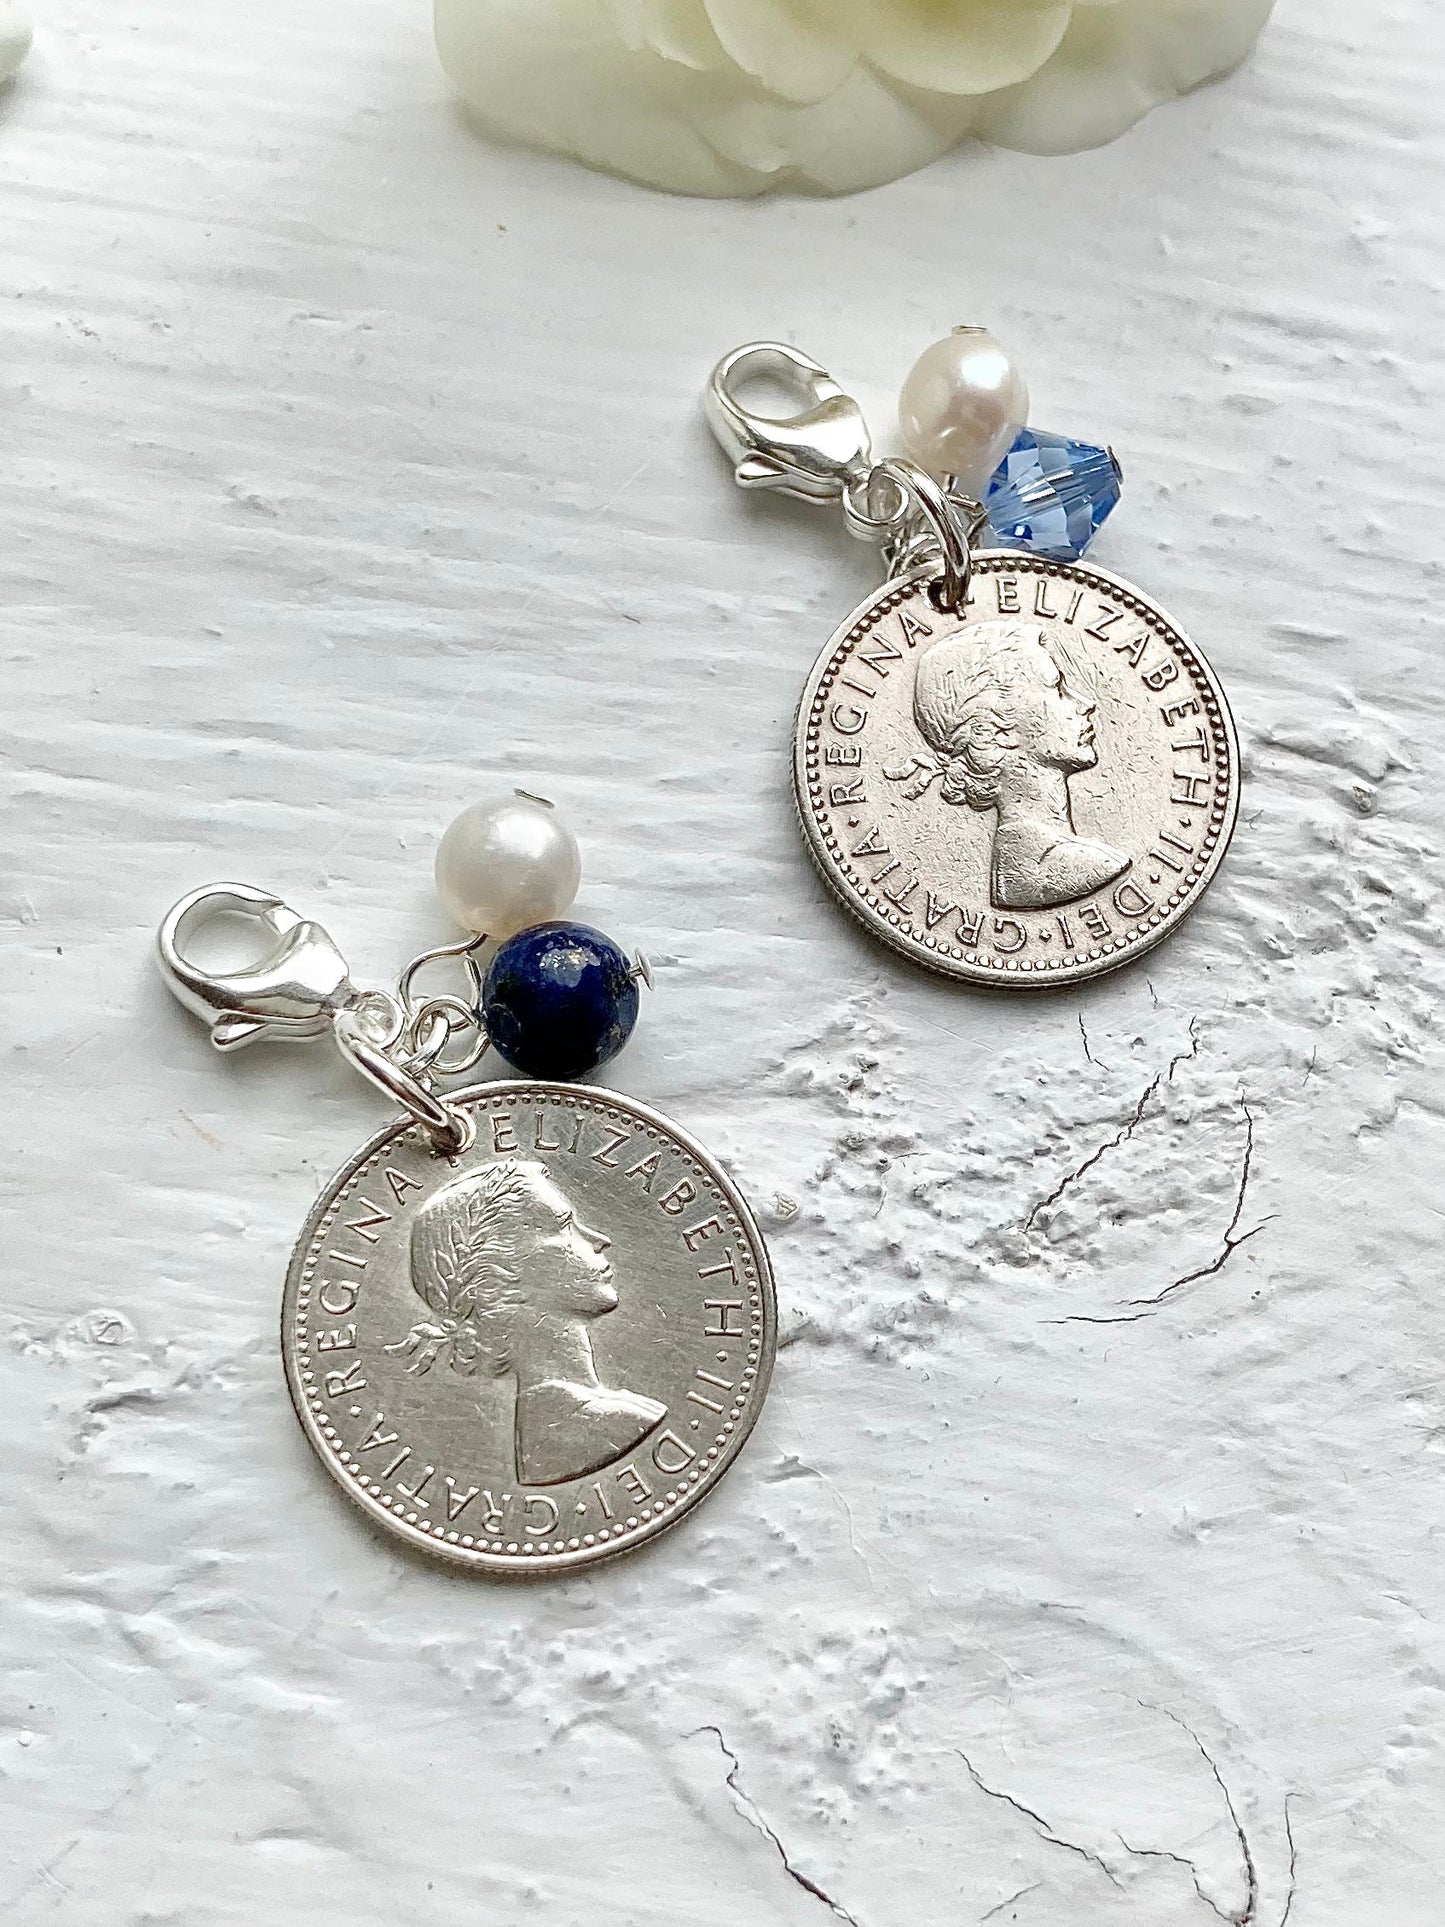 Something Old to Blue- Silver Sixpence Wedding Charm